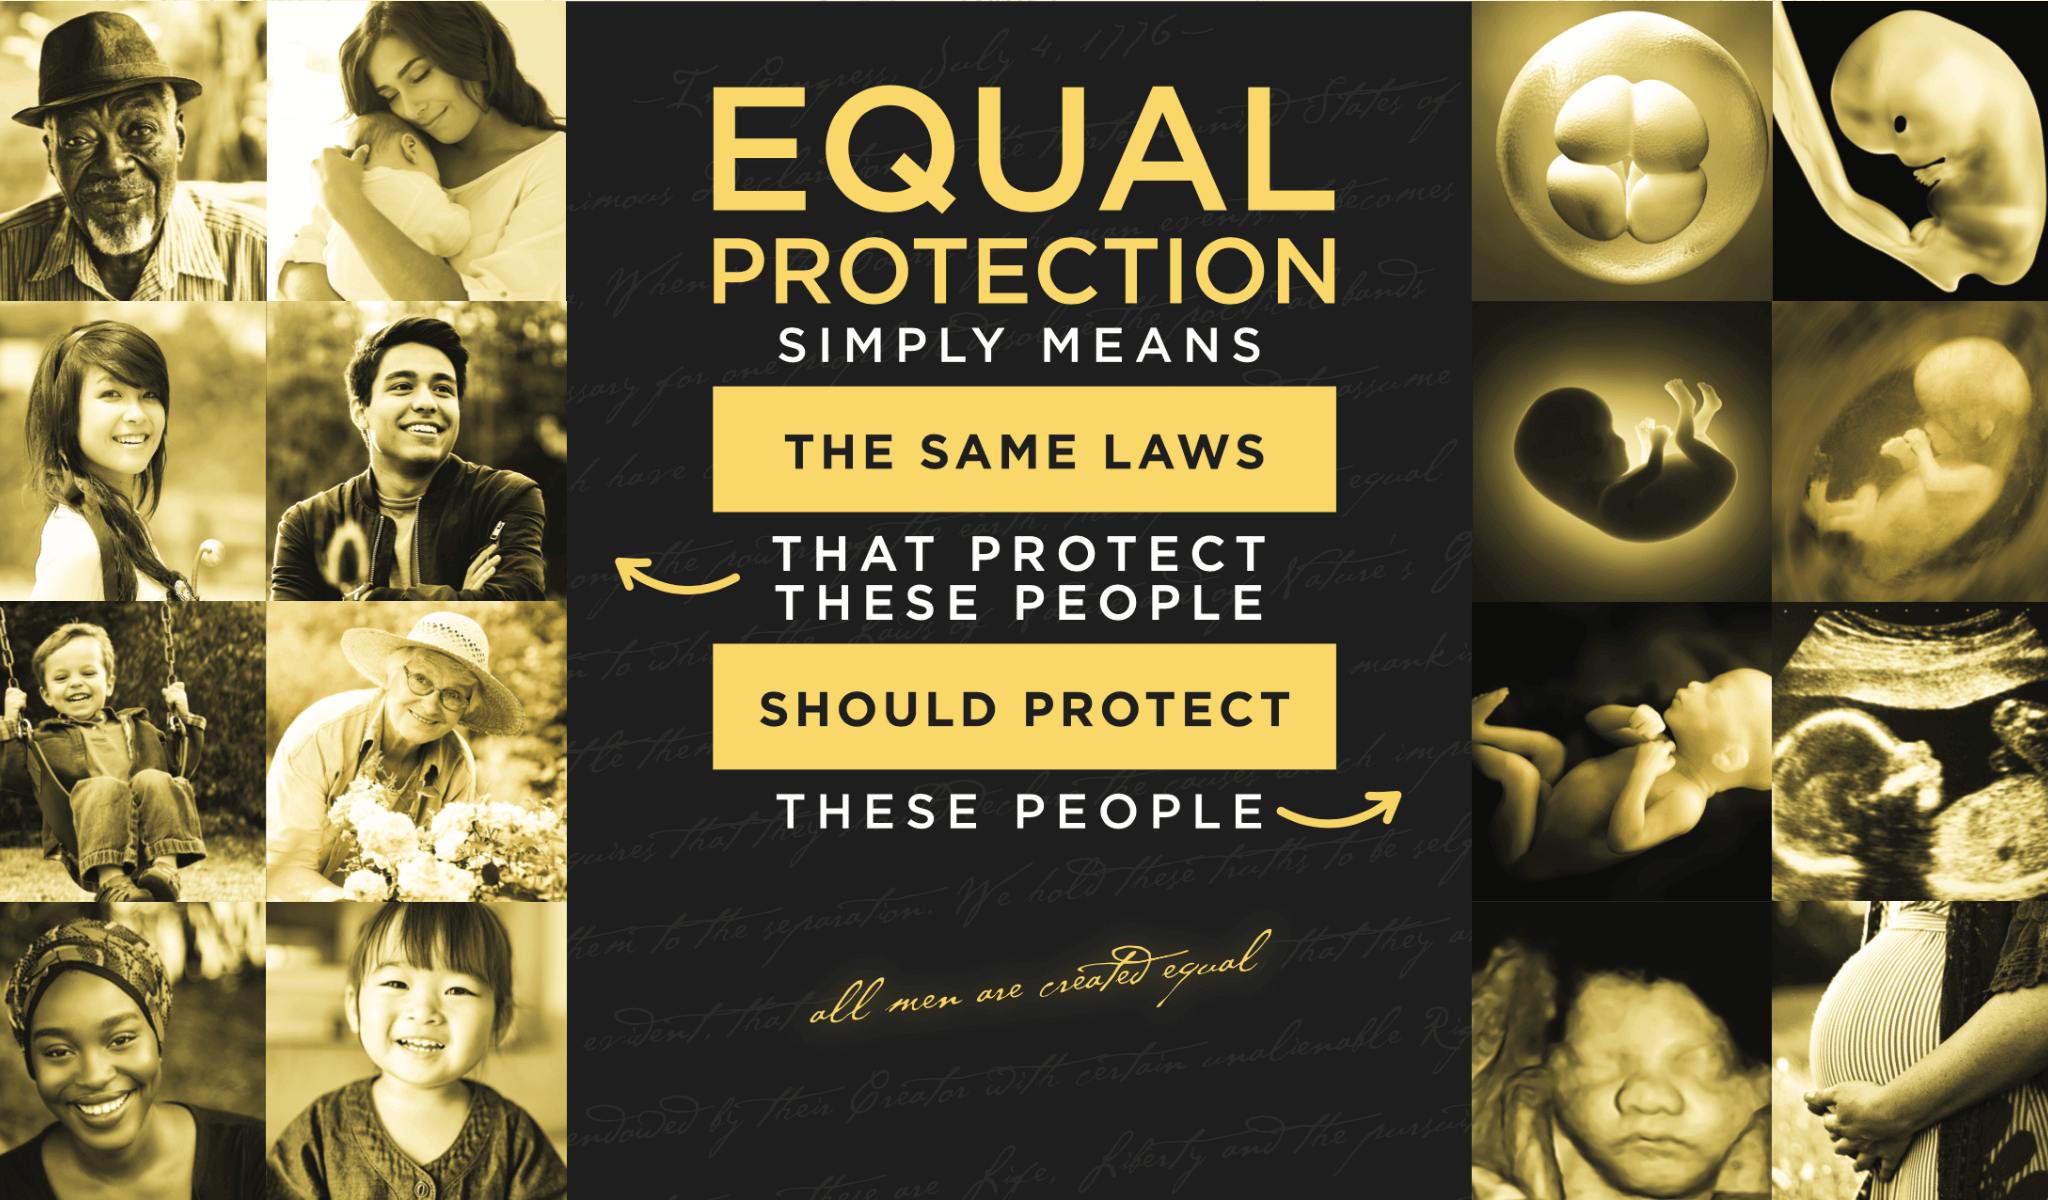 Equal protection simply means the same laws that protect these people should protect these people